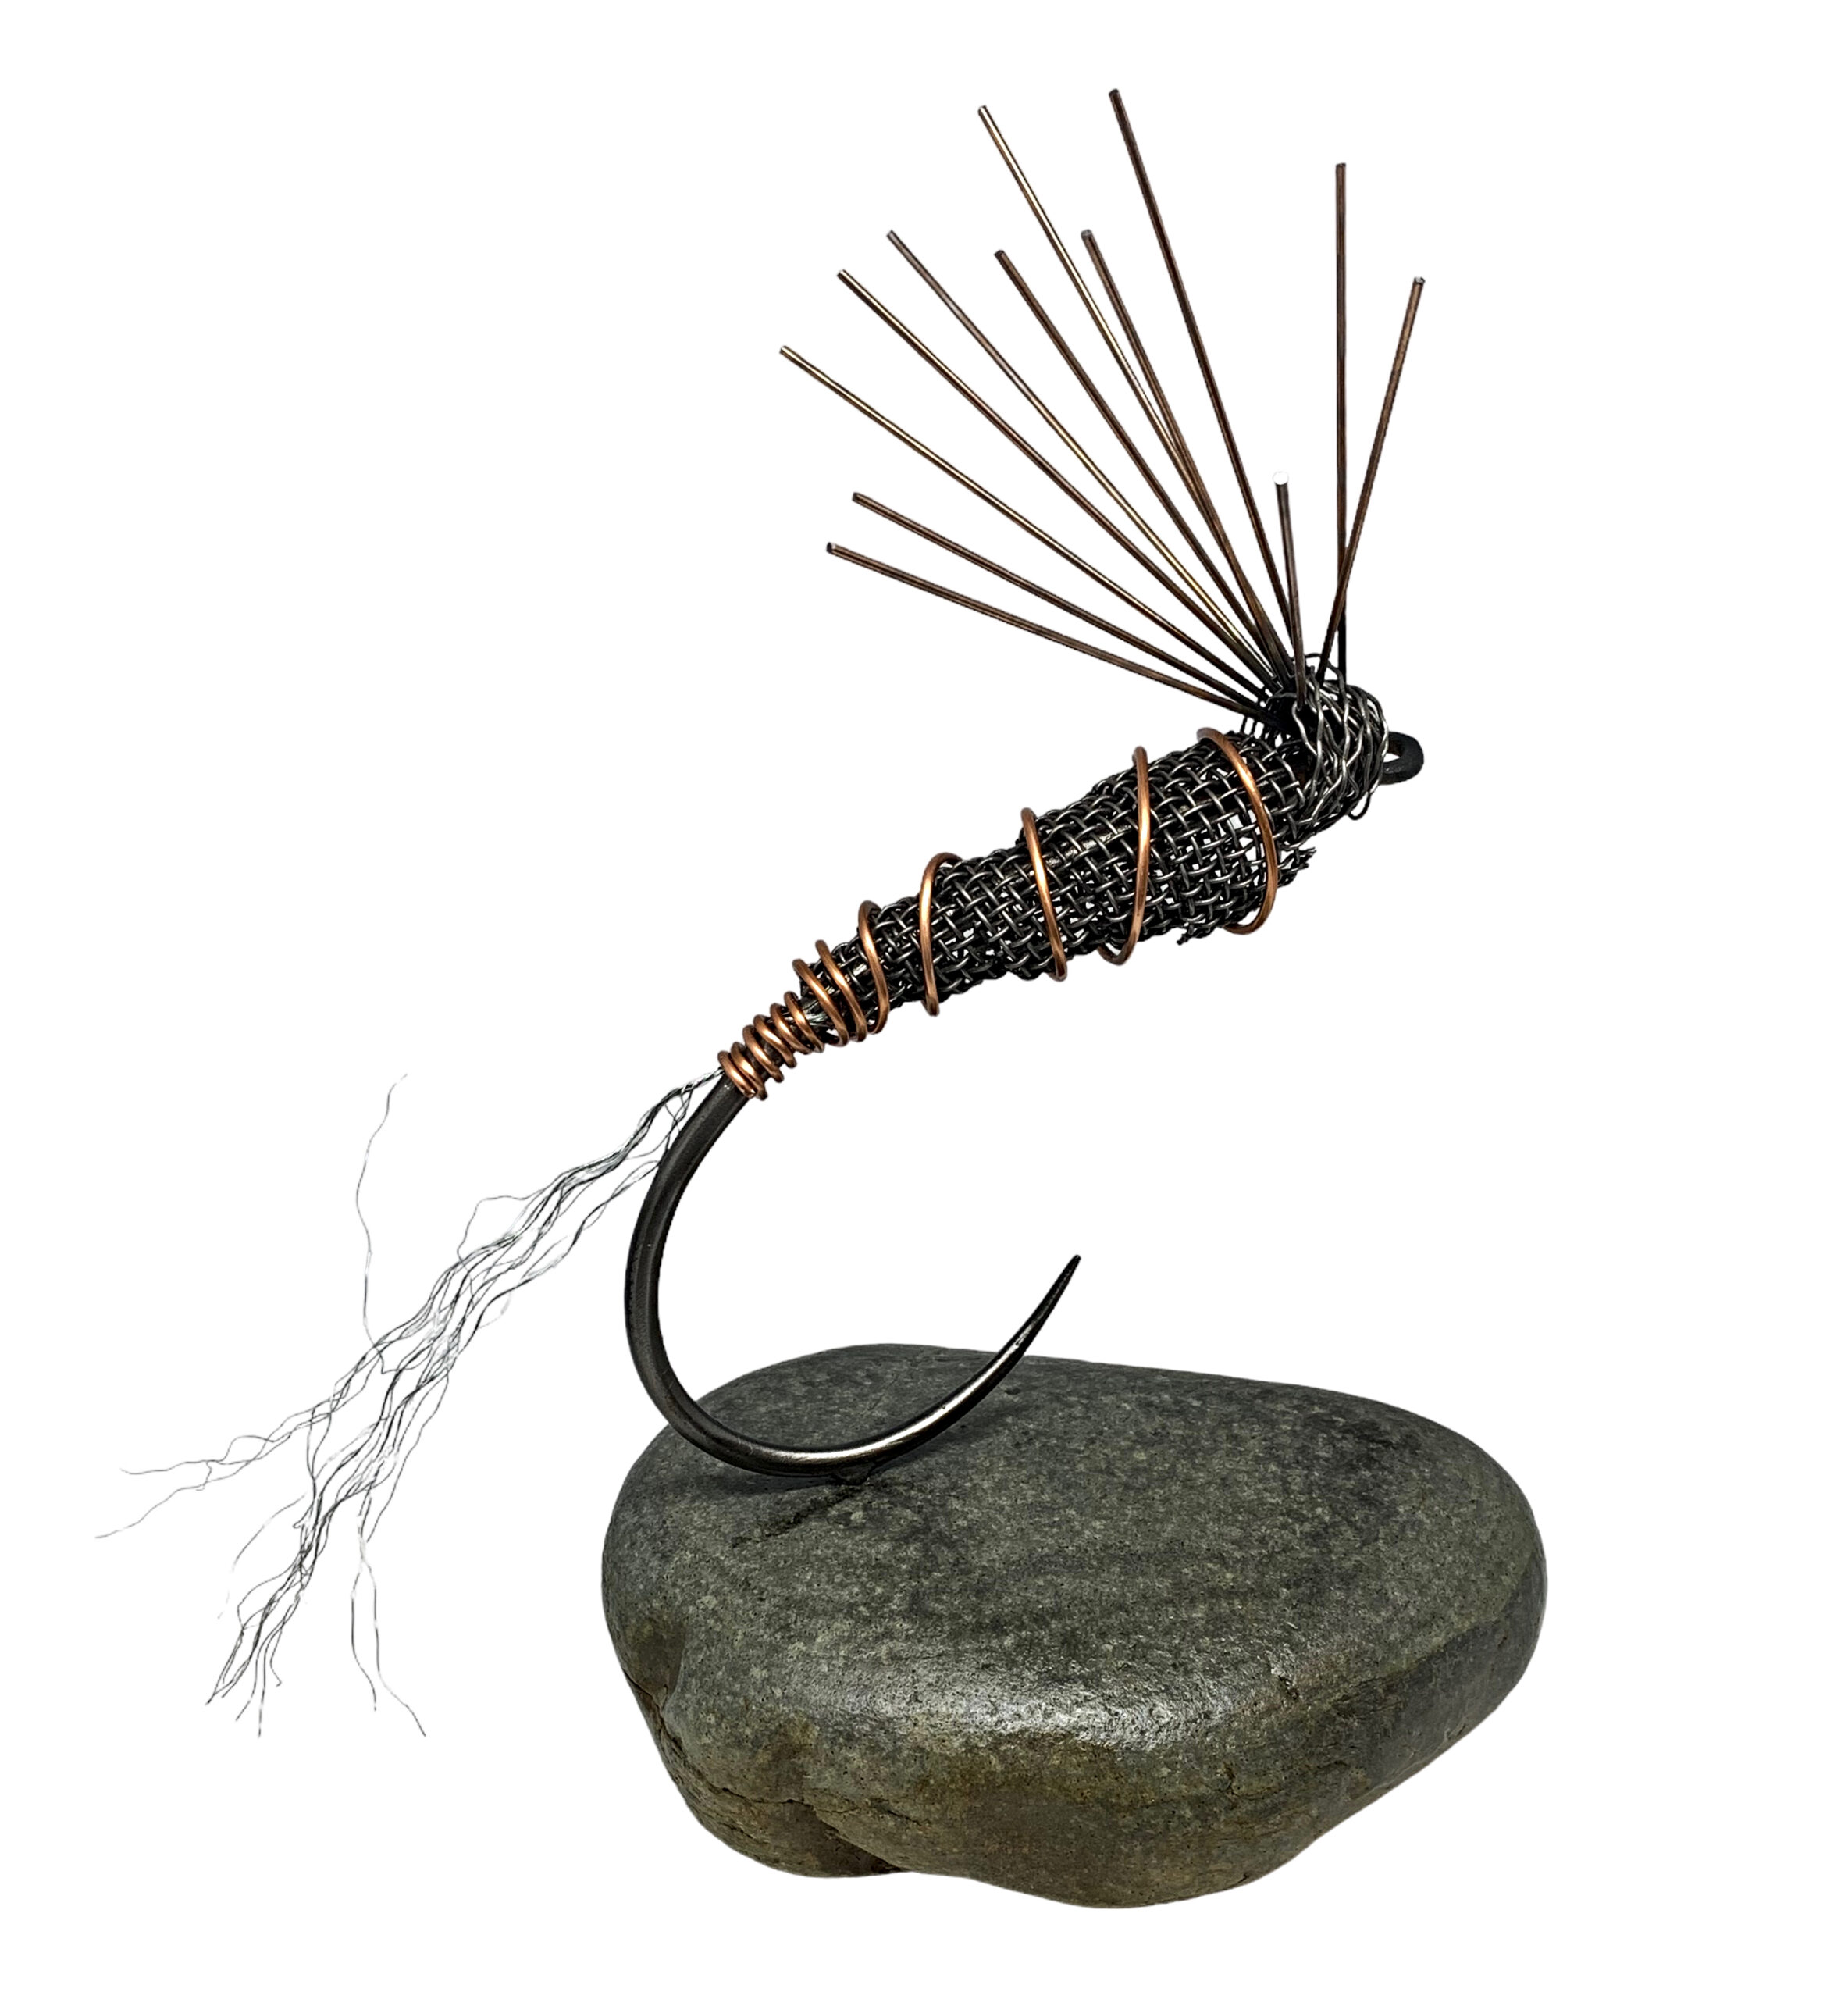 Toby Creek, mixed media fly fishing lure sculpture by Paul Reimer | Effusion Art Gallery, Invermere BC